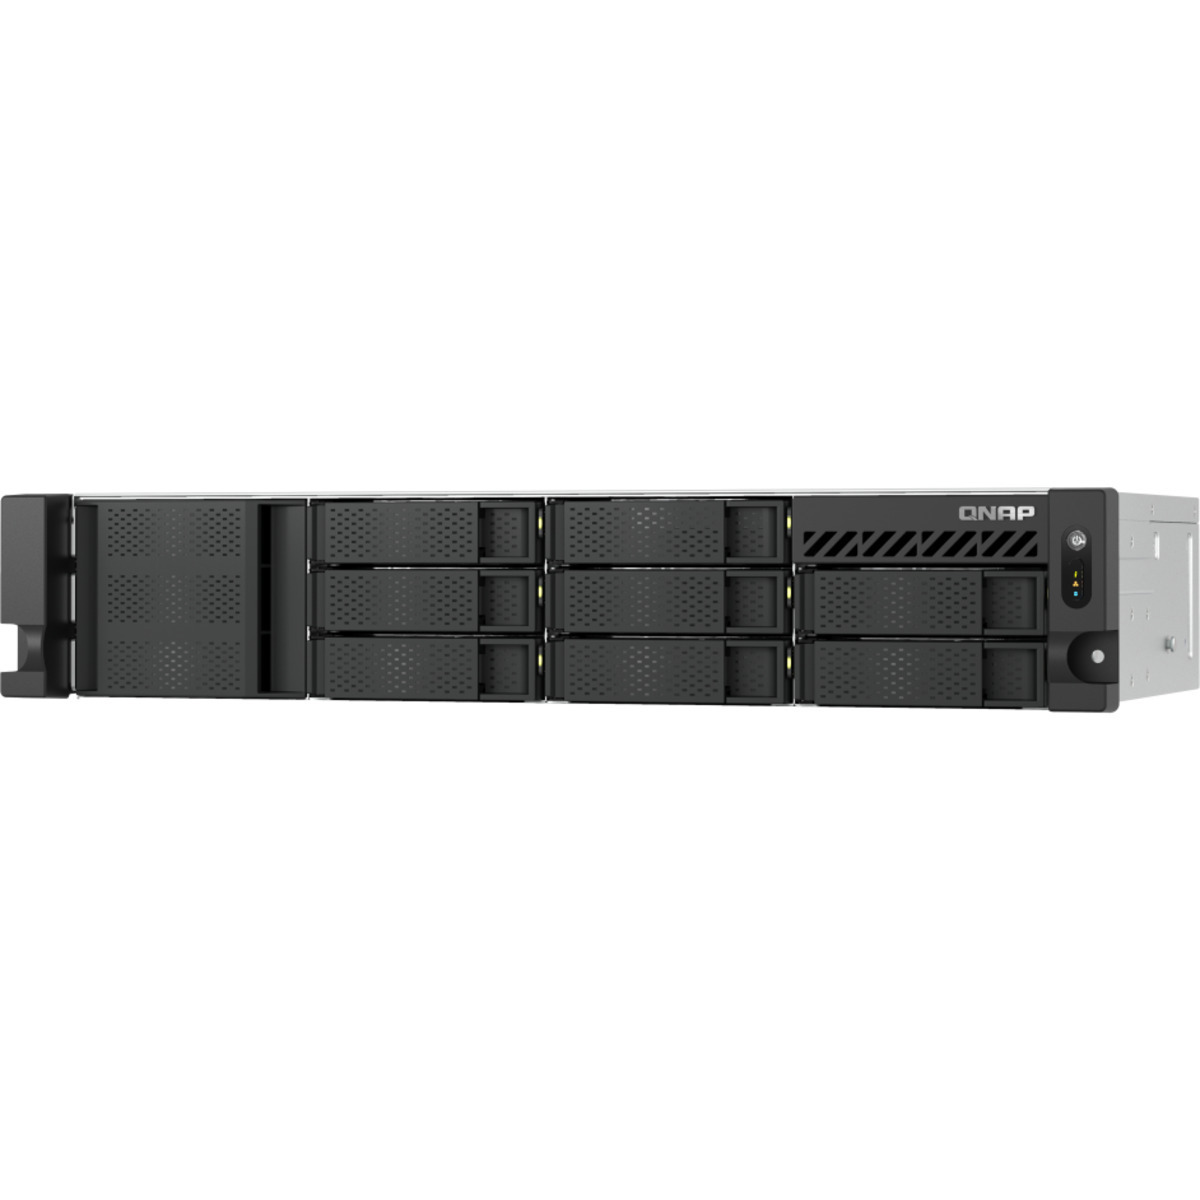 QNAP TS-855eU 8tb 8-Bay RackMount Multimedia / Power User / Business NAS - Network Attached Storage Device 8x1tb Western Digital Red SA500 WDS100T1R0A 2.5 560/530MB/s SATA 6Gb/s SSD NAS Class Drives Installed - Burn-In Tested - FREE RAM UPGRADE TS-855eU